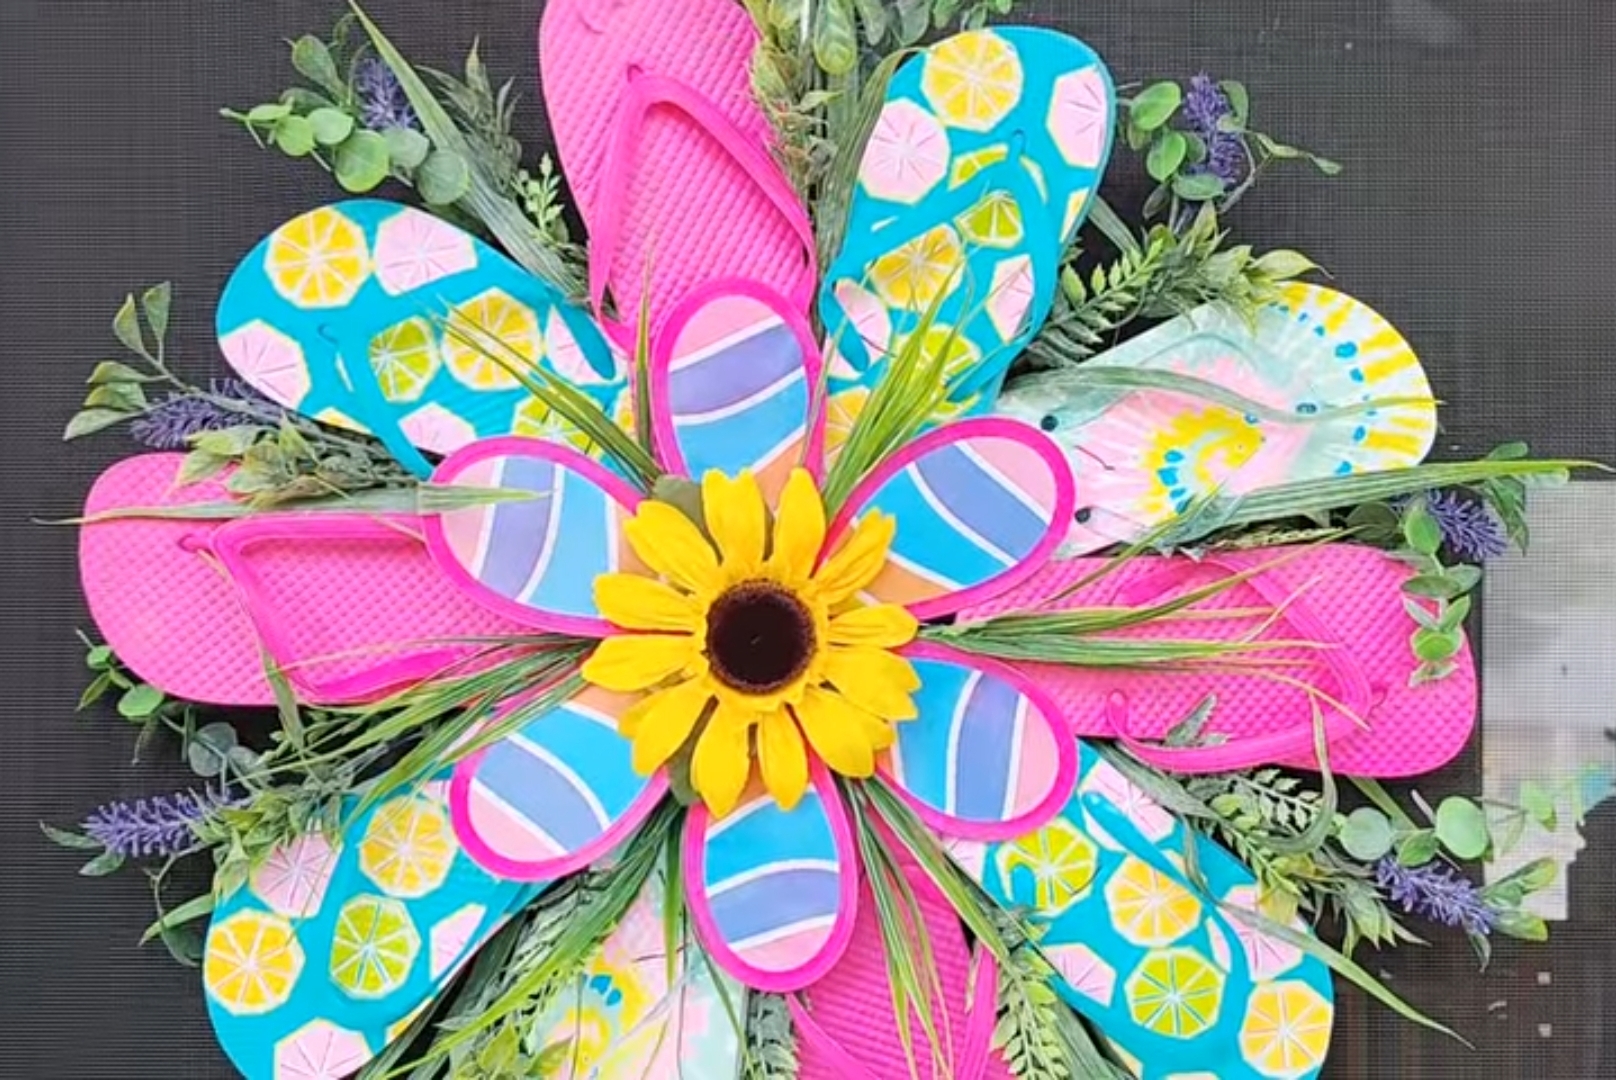 Colorful summer crafts